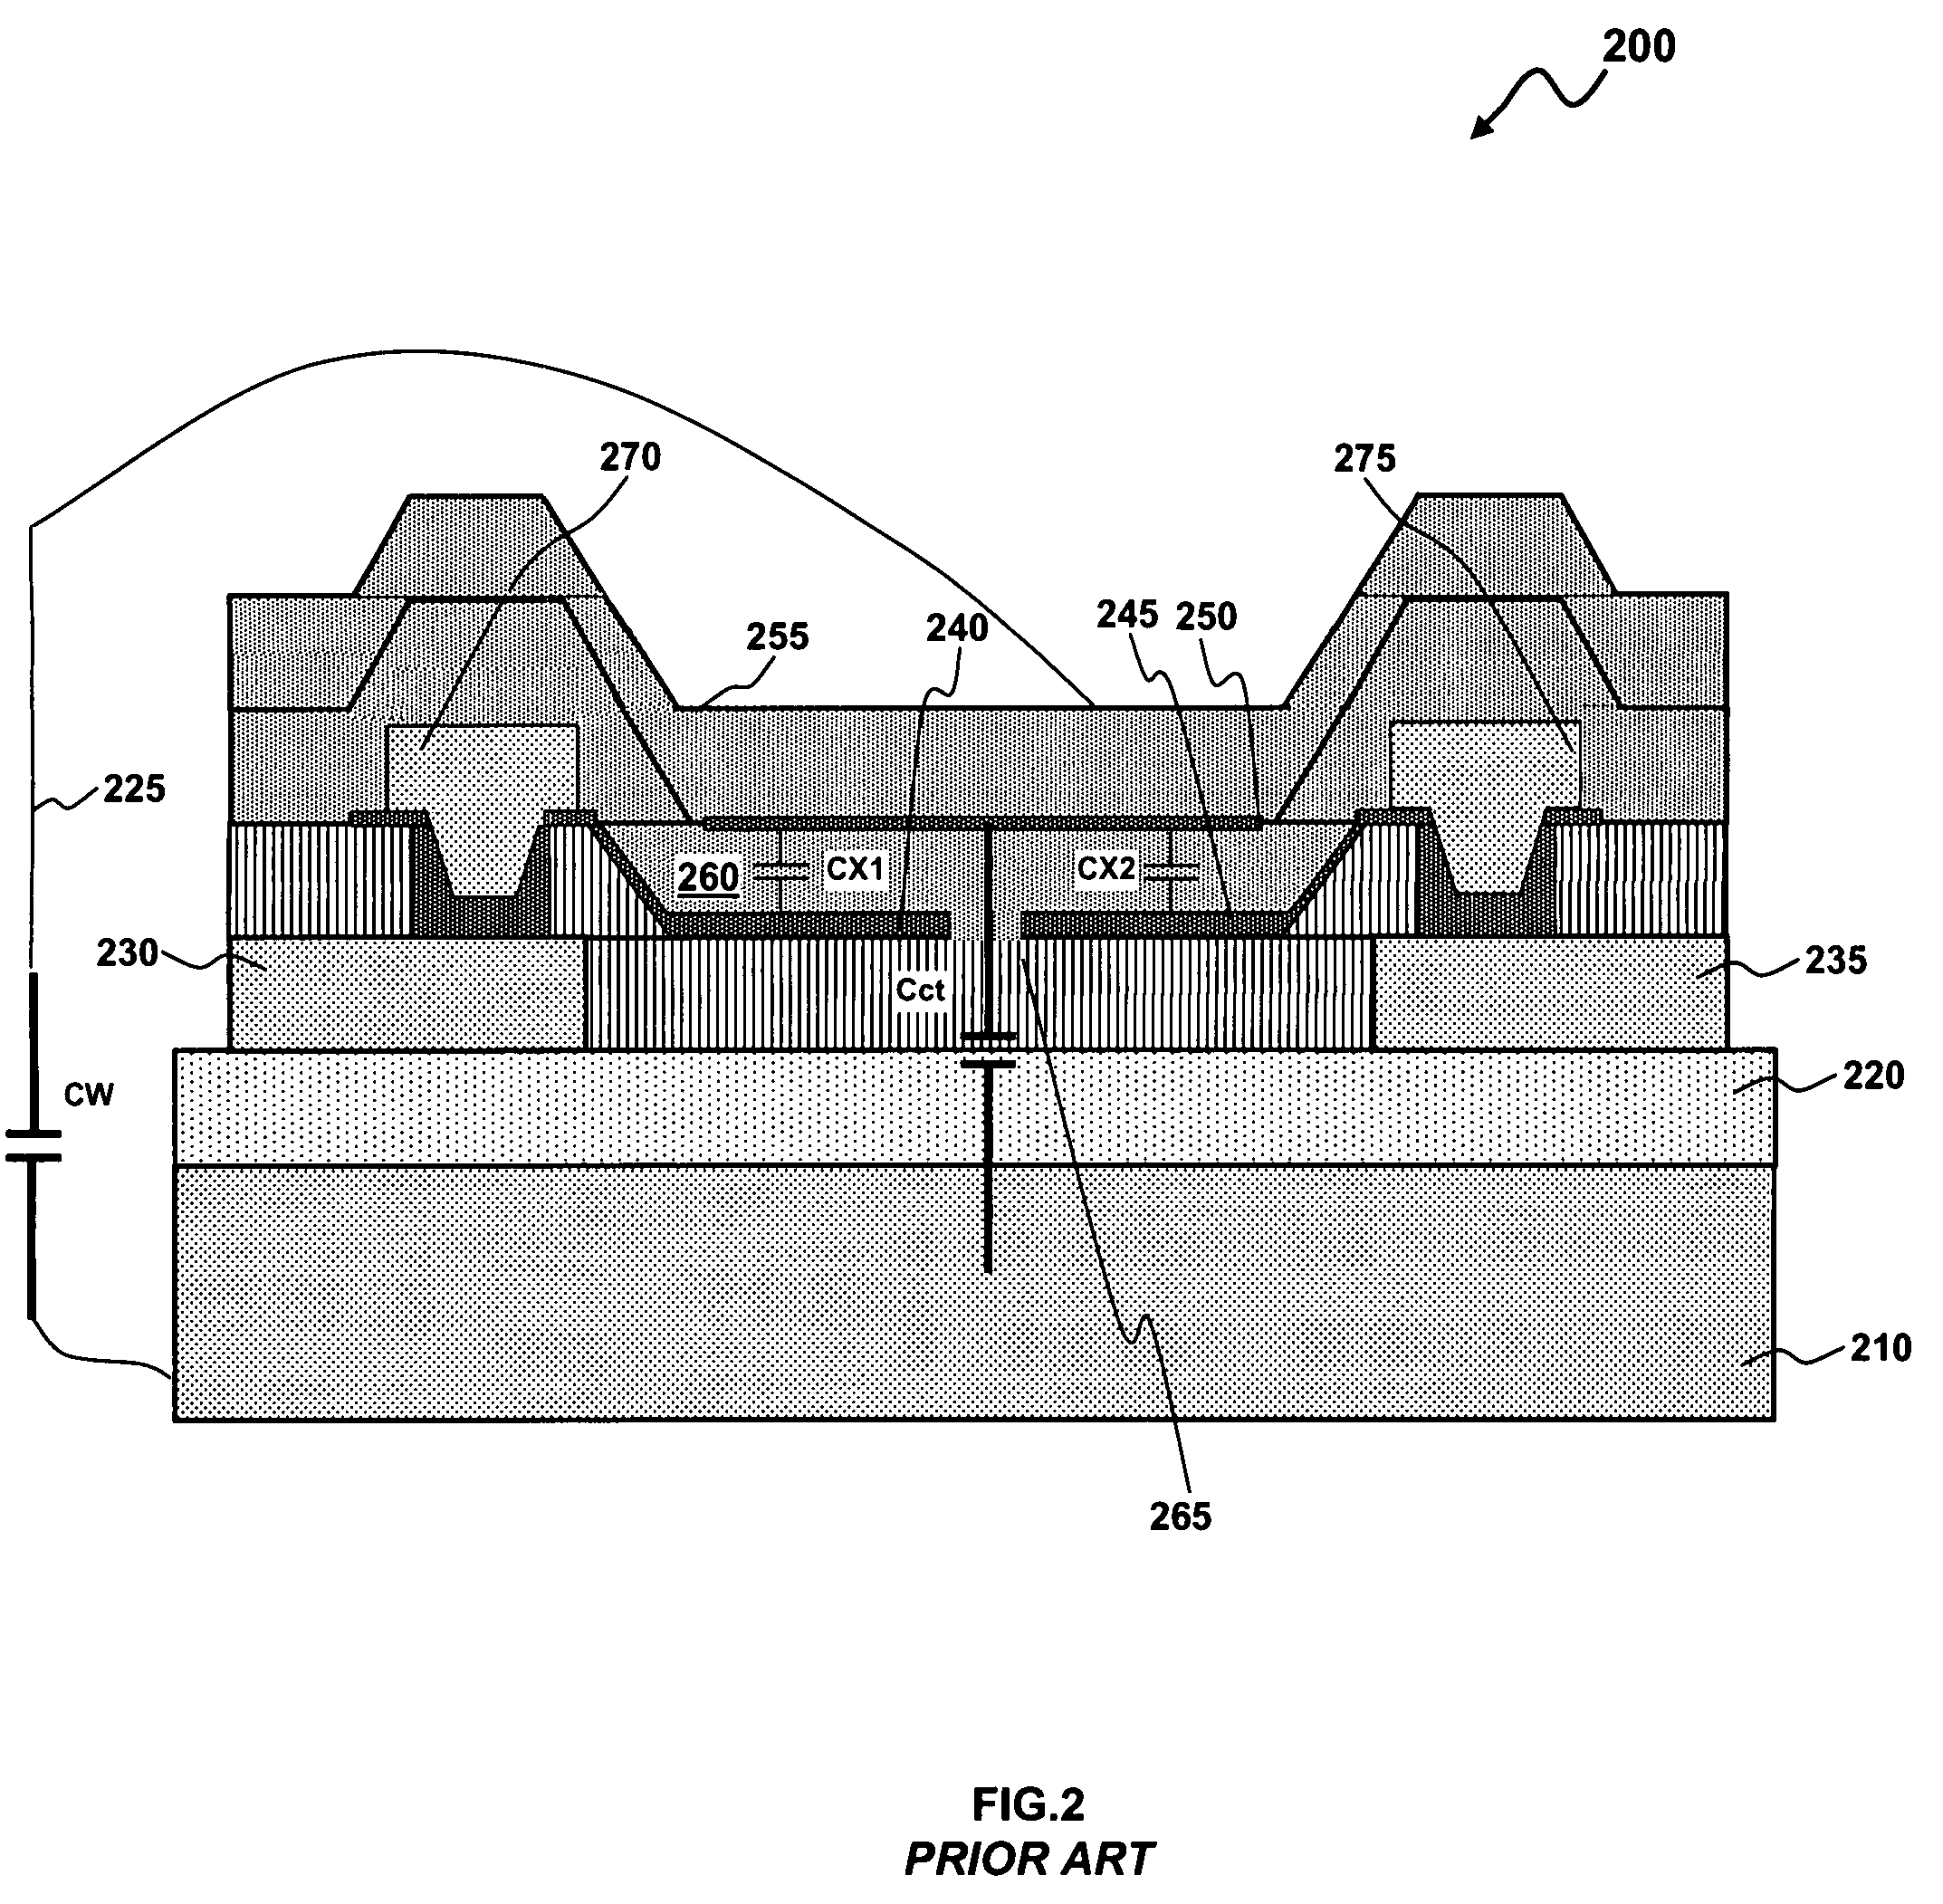 Structure for capacitive balancing of integrated relative humidity sensor